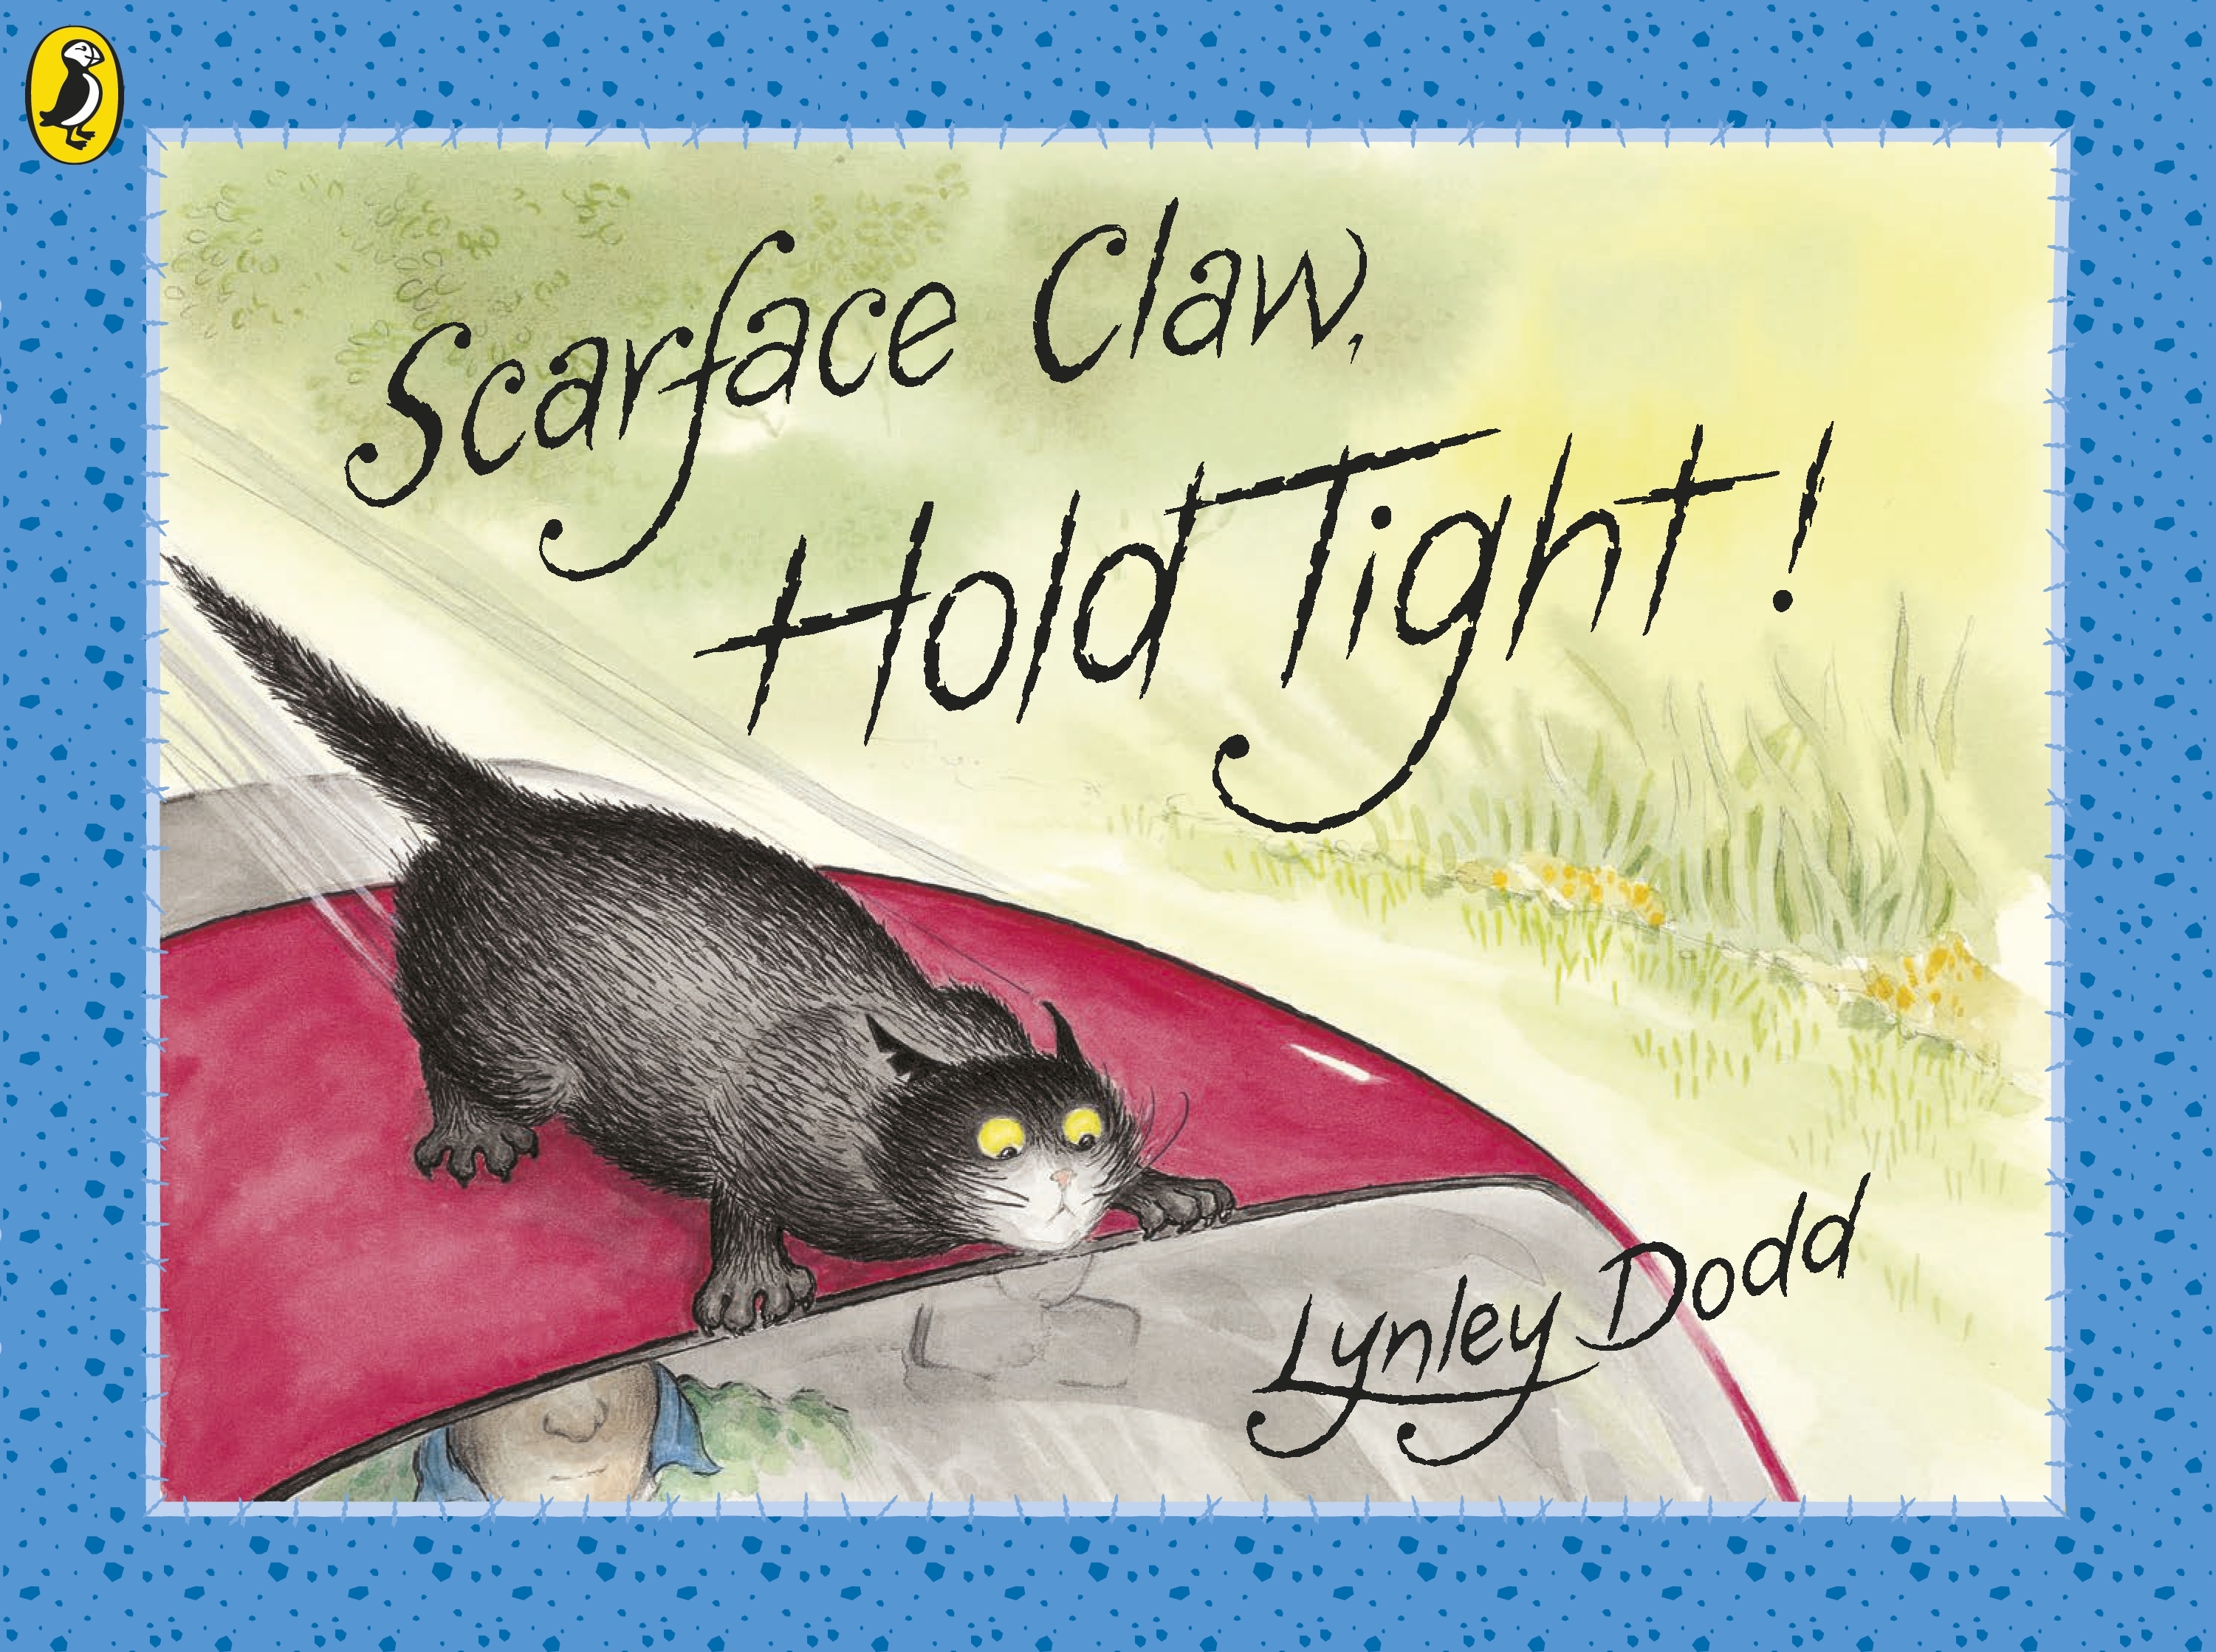 Book “Scarface Claw, Hold Tight” by Lynley Dodd — January 3, 2019